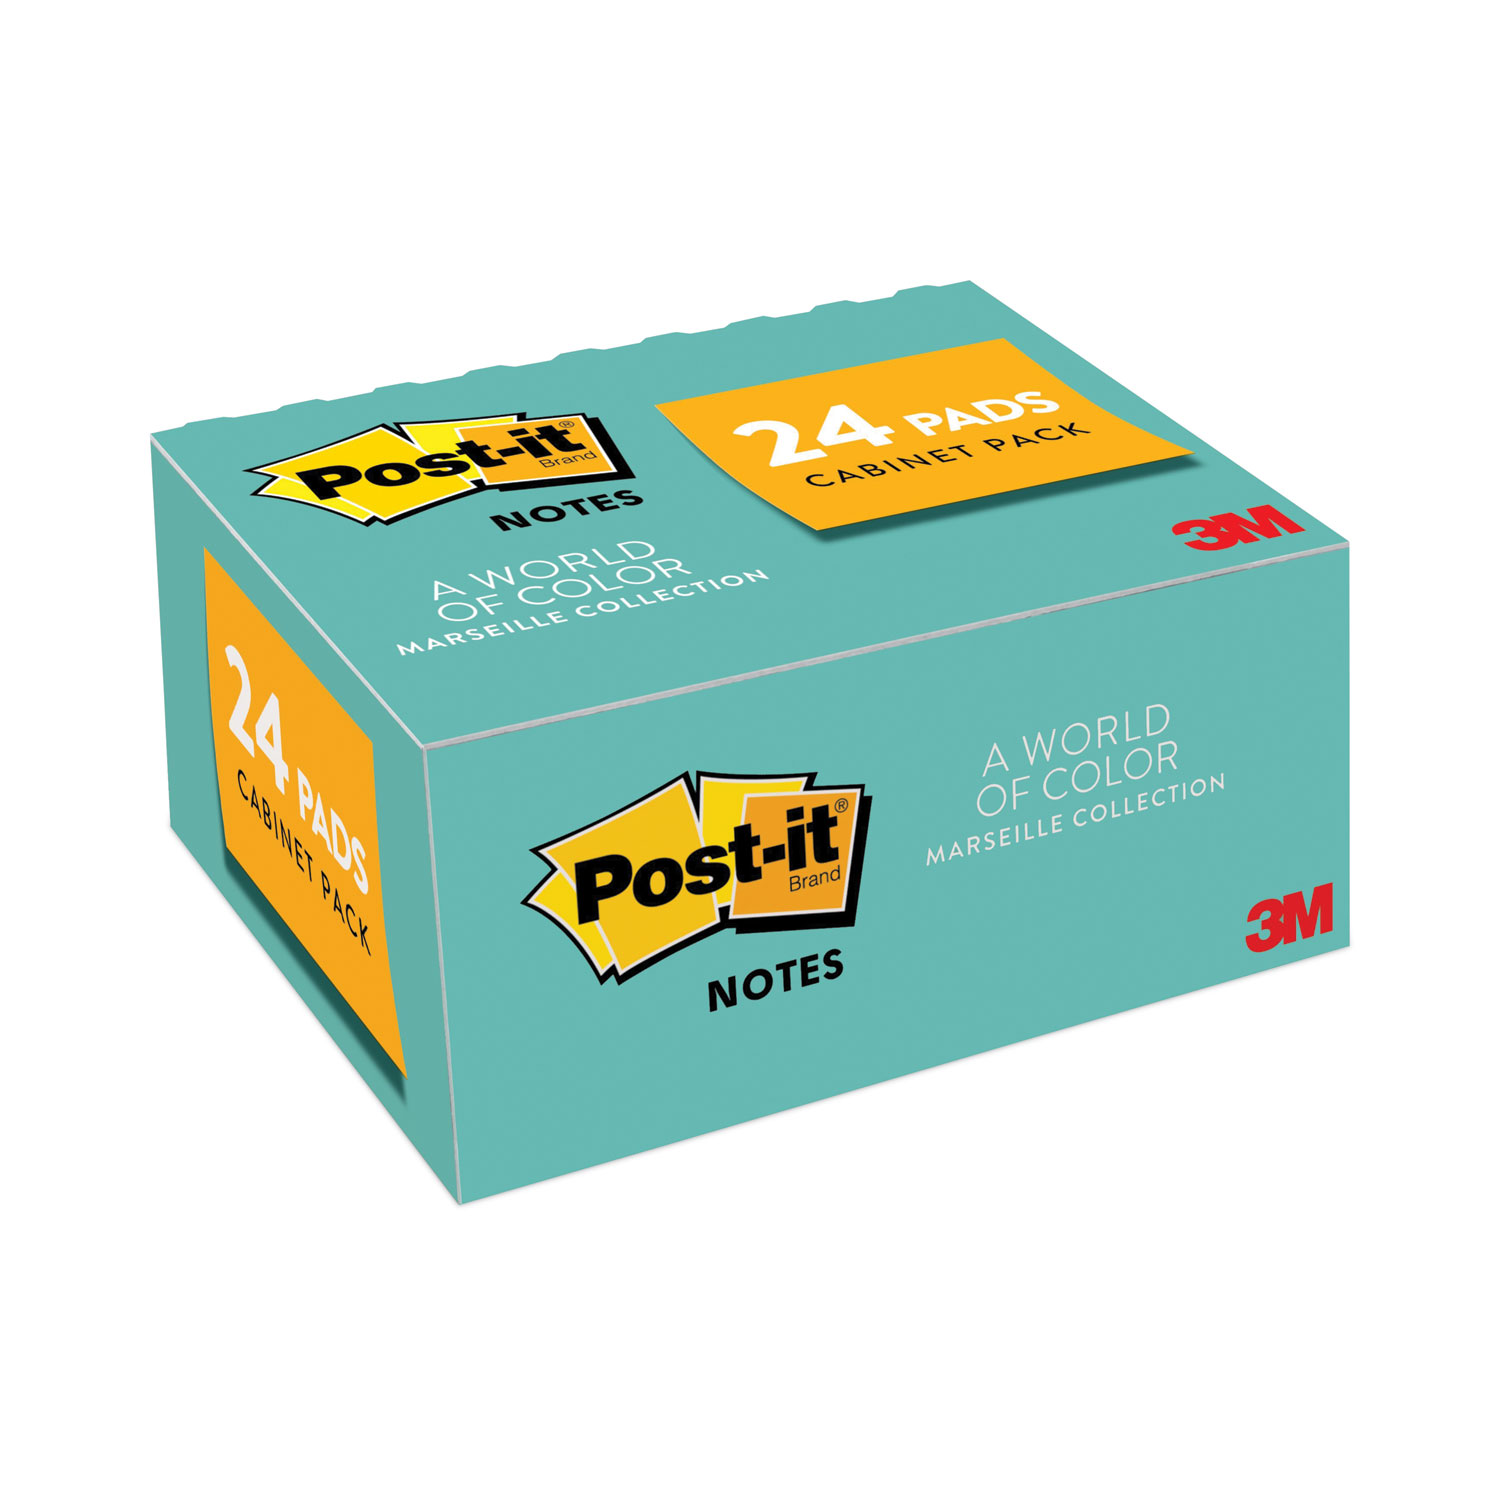 Post-it Notes Original Pads 24 Pack, 1.5in. x 2in, Marseille Collection